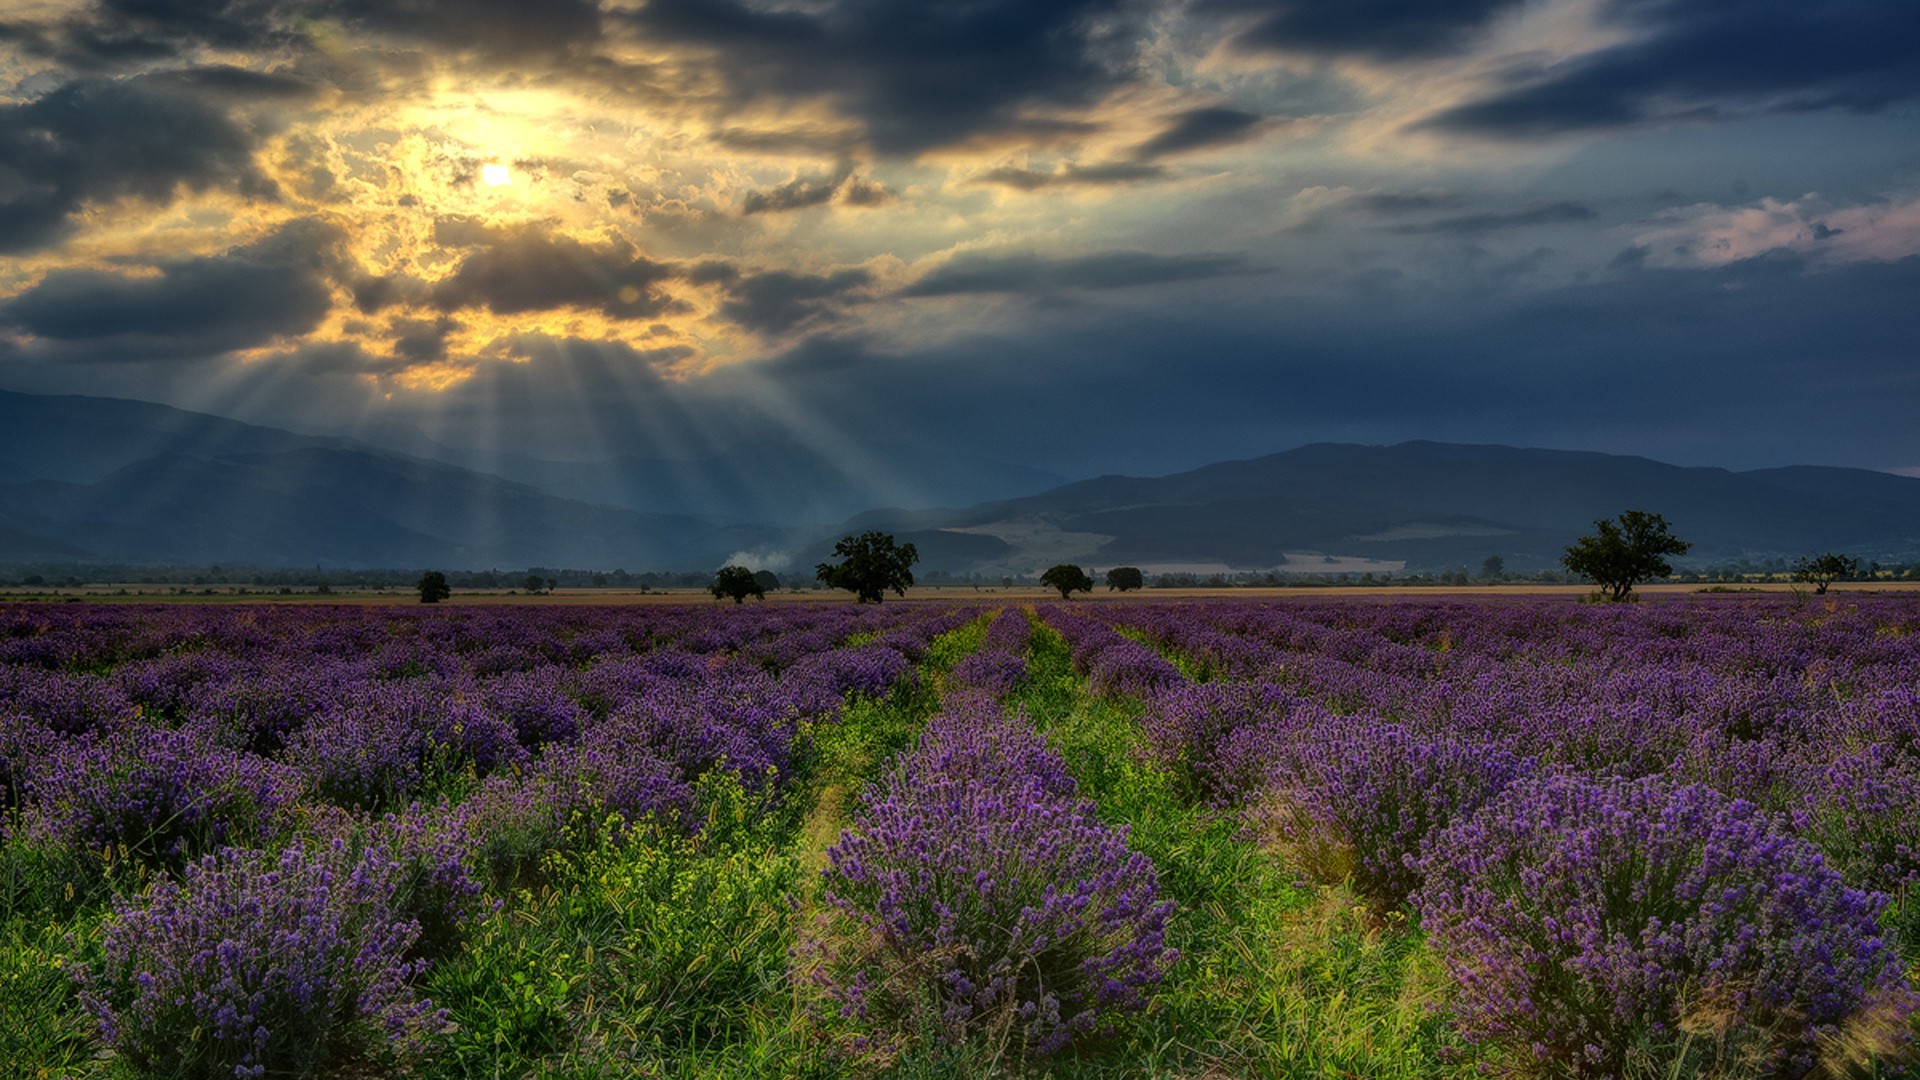 Wallpaper x px bulgaria clouds field flowers hill landscape lavender nature sun rays trees x